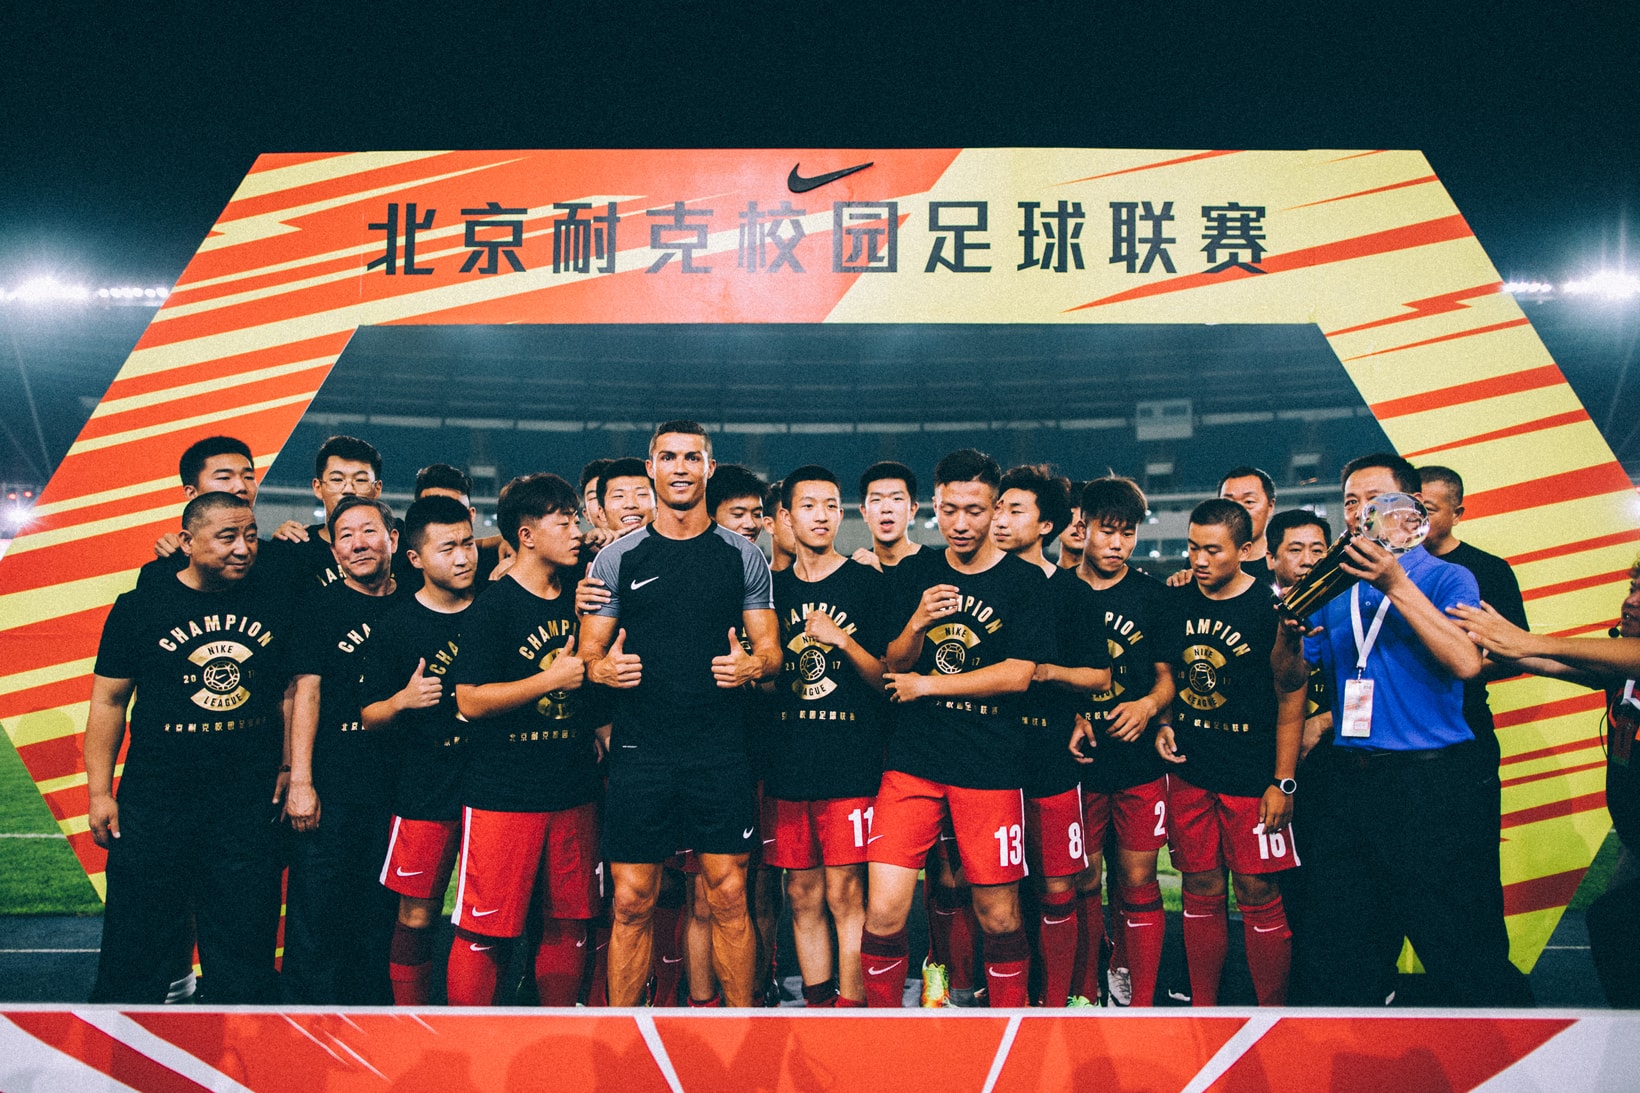 Cristiano Ronaldo Journeys to Shanghai and Beijing for His First Individual Nike CR7 Tour CSL